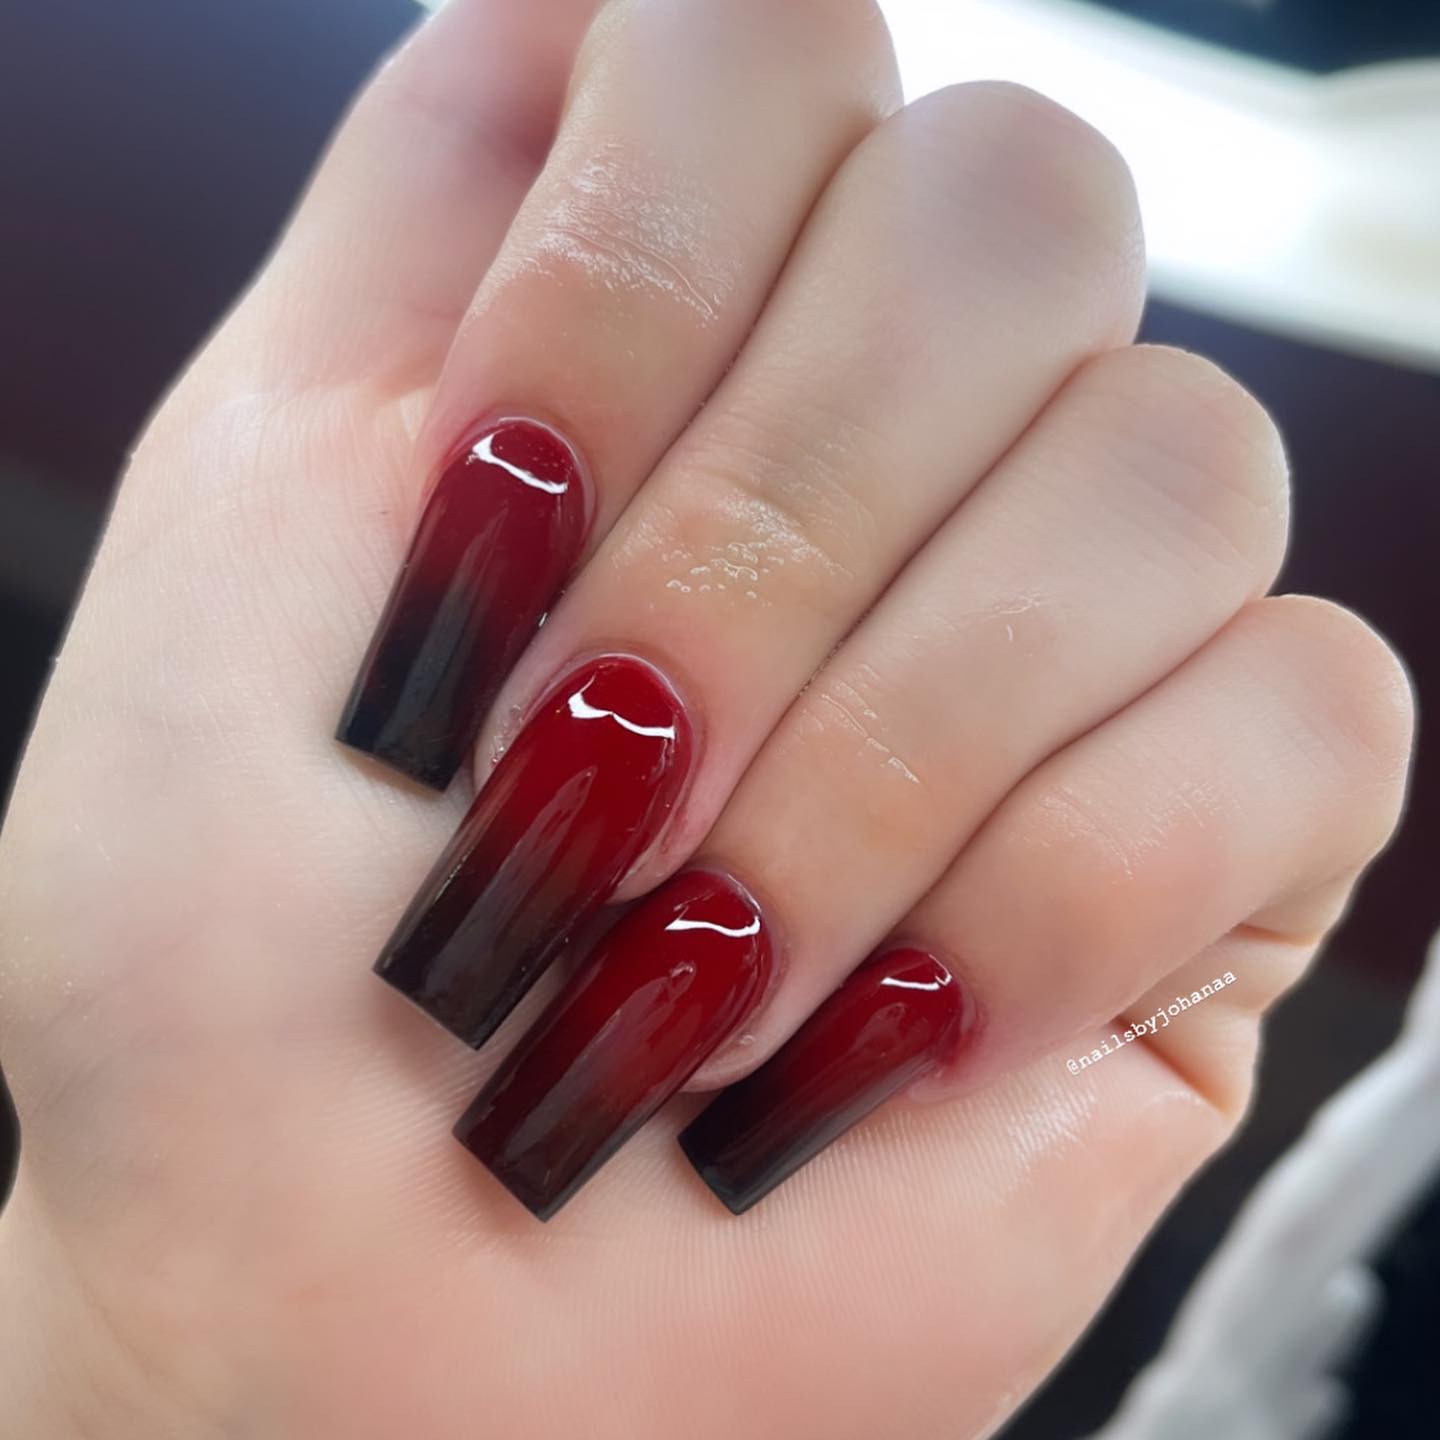 Long square nails feature flat edges and it is a practical option for many women. The edges have a darker tone to the bottom and this effect is what makes these nails look amazing.